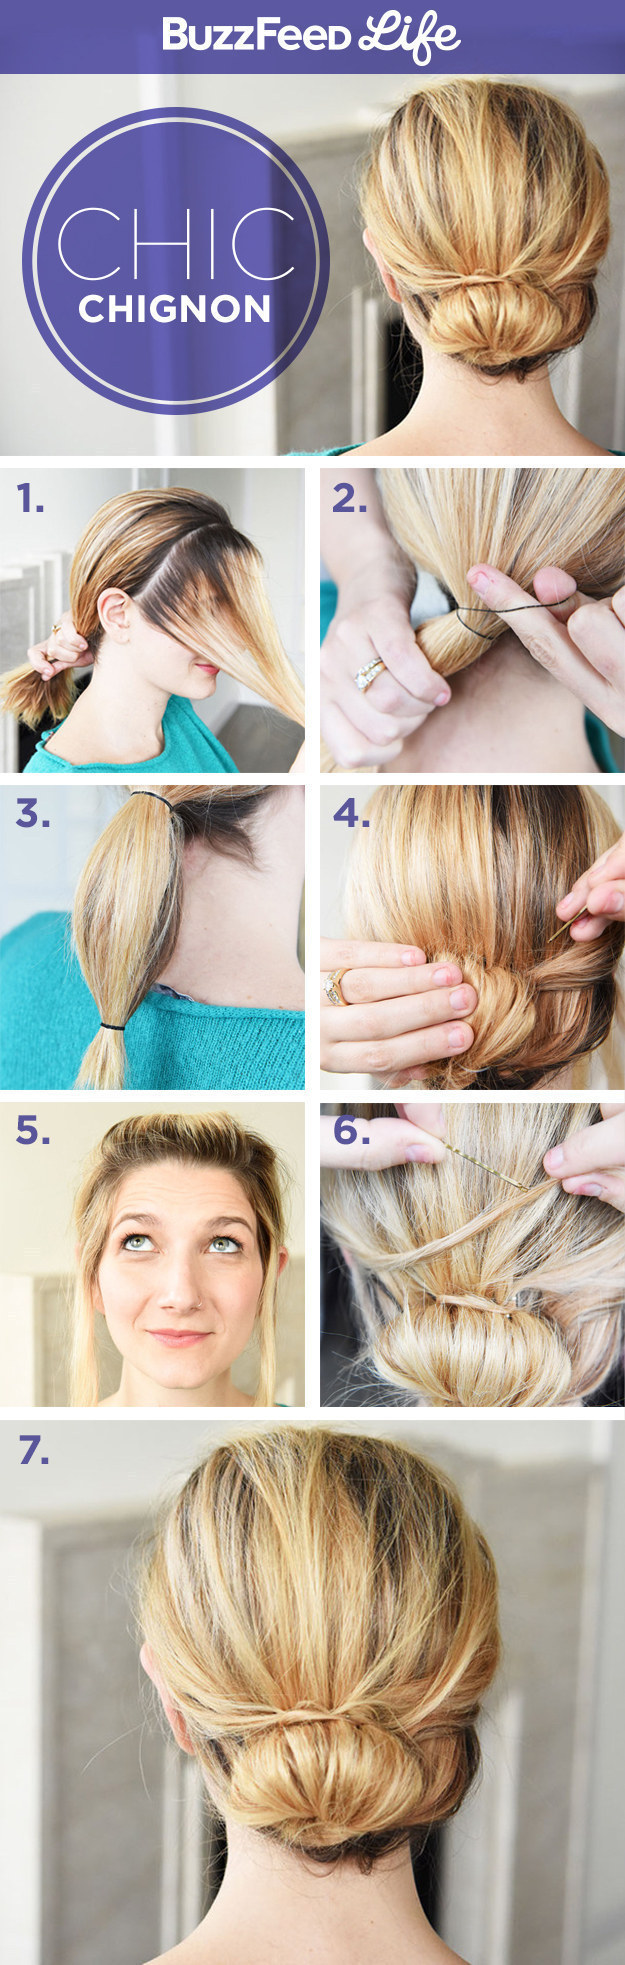 25 Five Minute Or Less Hairstyles Thatll Save You From Busy Mornings